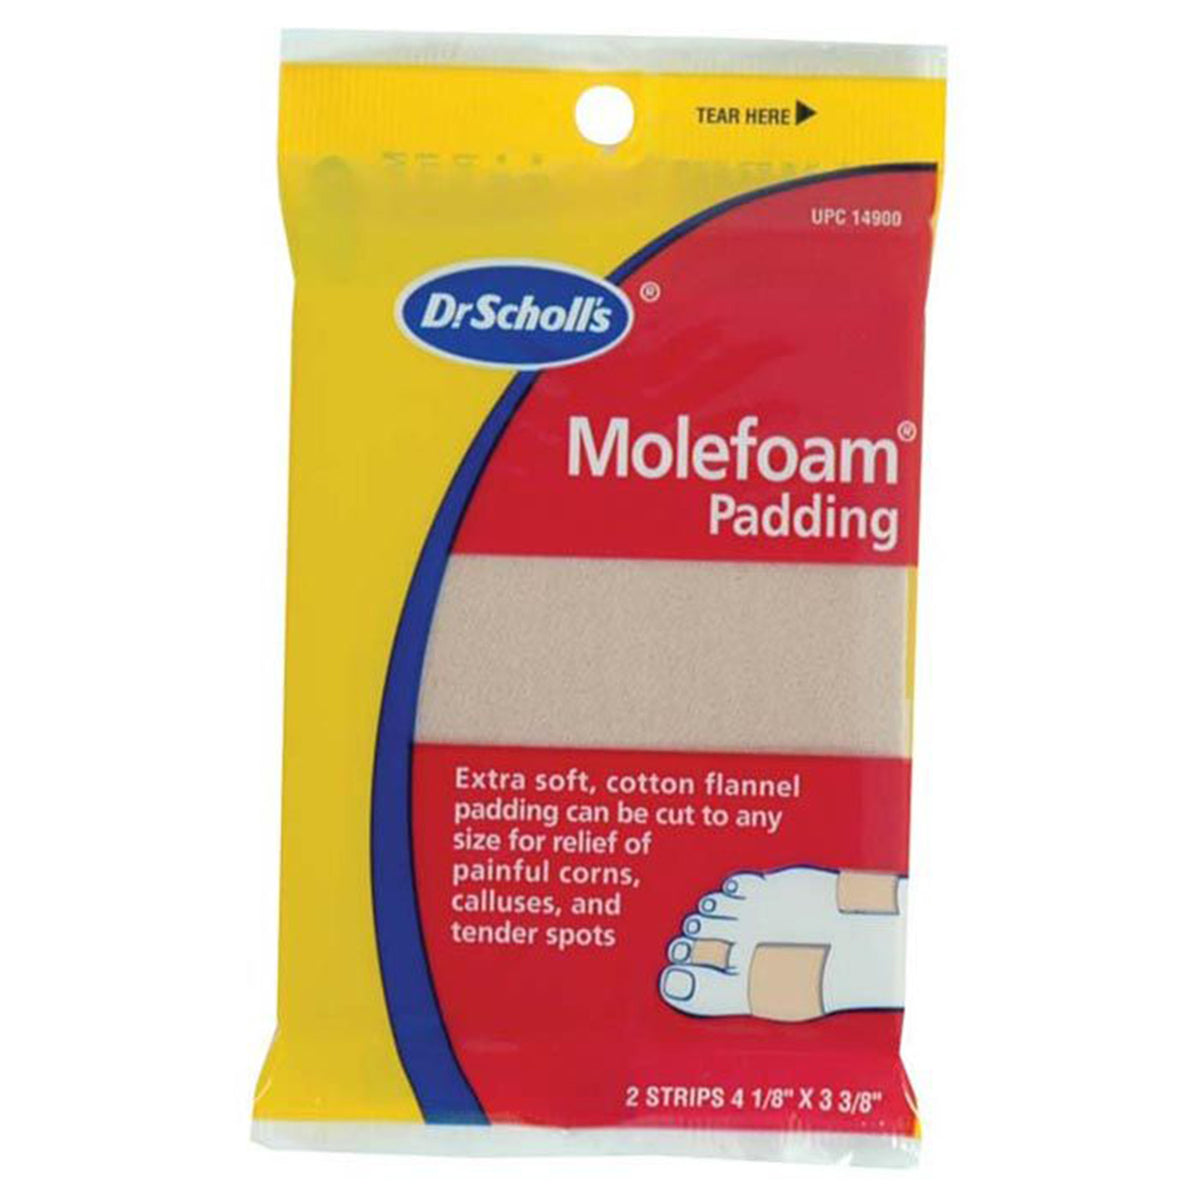 molefoam extra soft cotton flannel padding for relief of blisters, corns, calluses and tender spots, 2 strips 4 1/8&quot; x 3 3/8&quot;